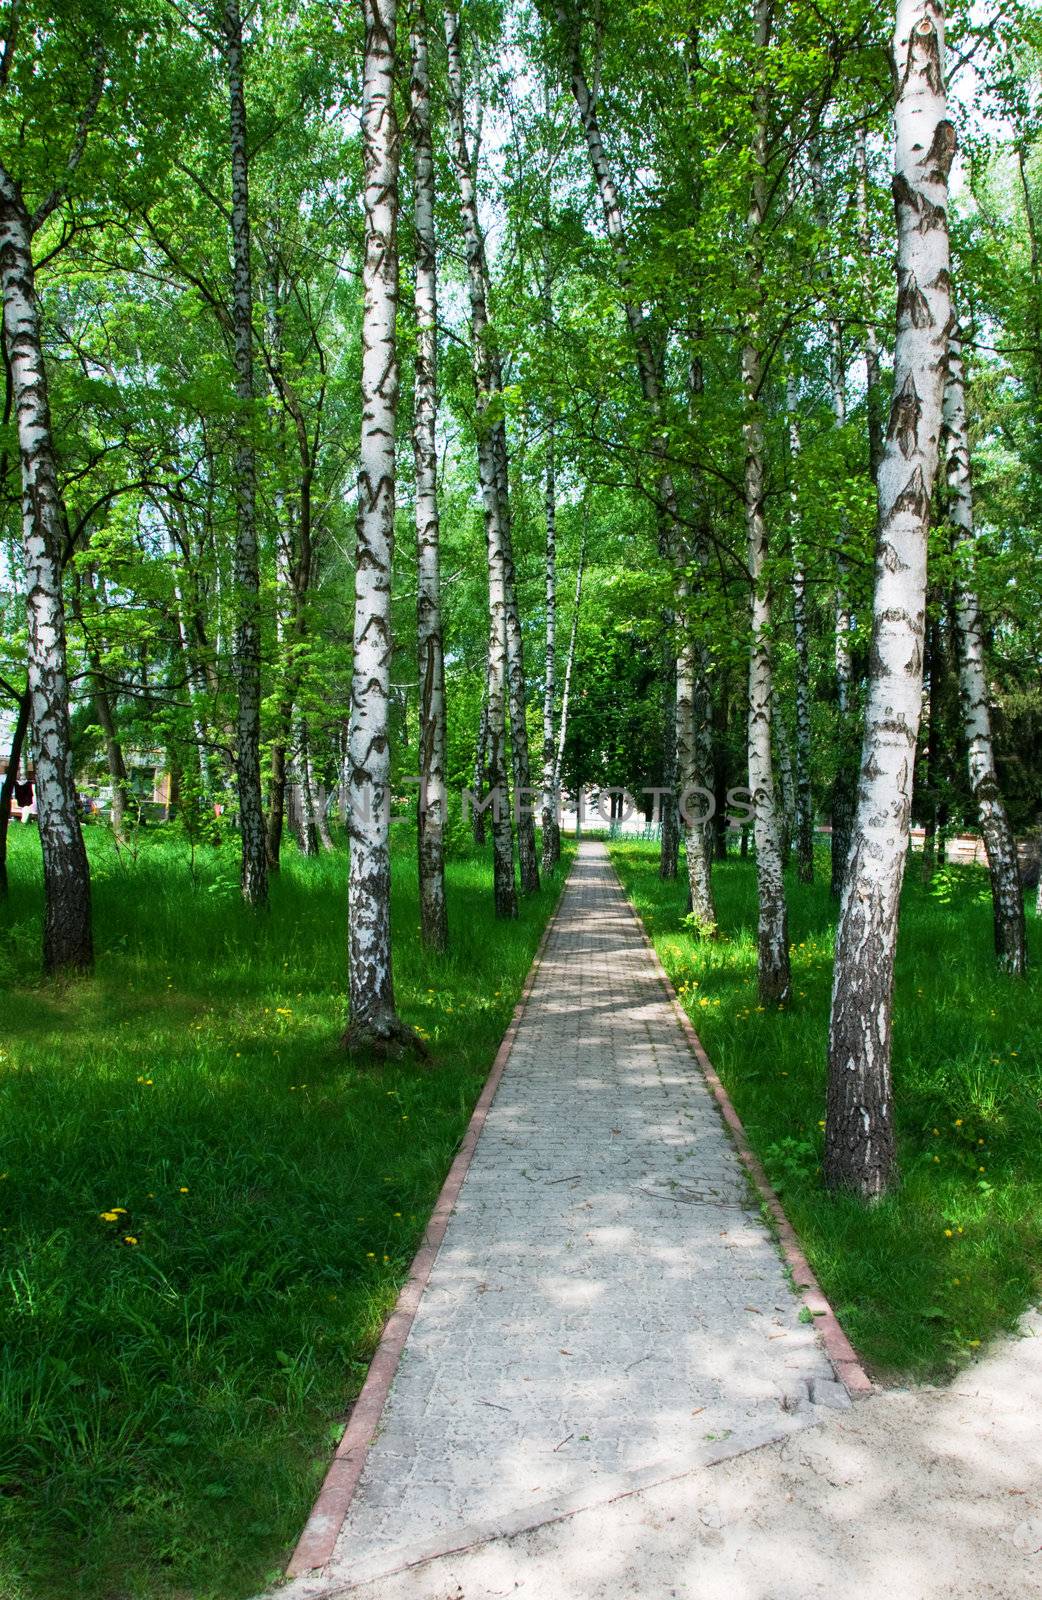 Path between birches and grass with dandelions